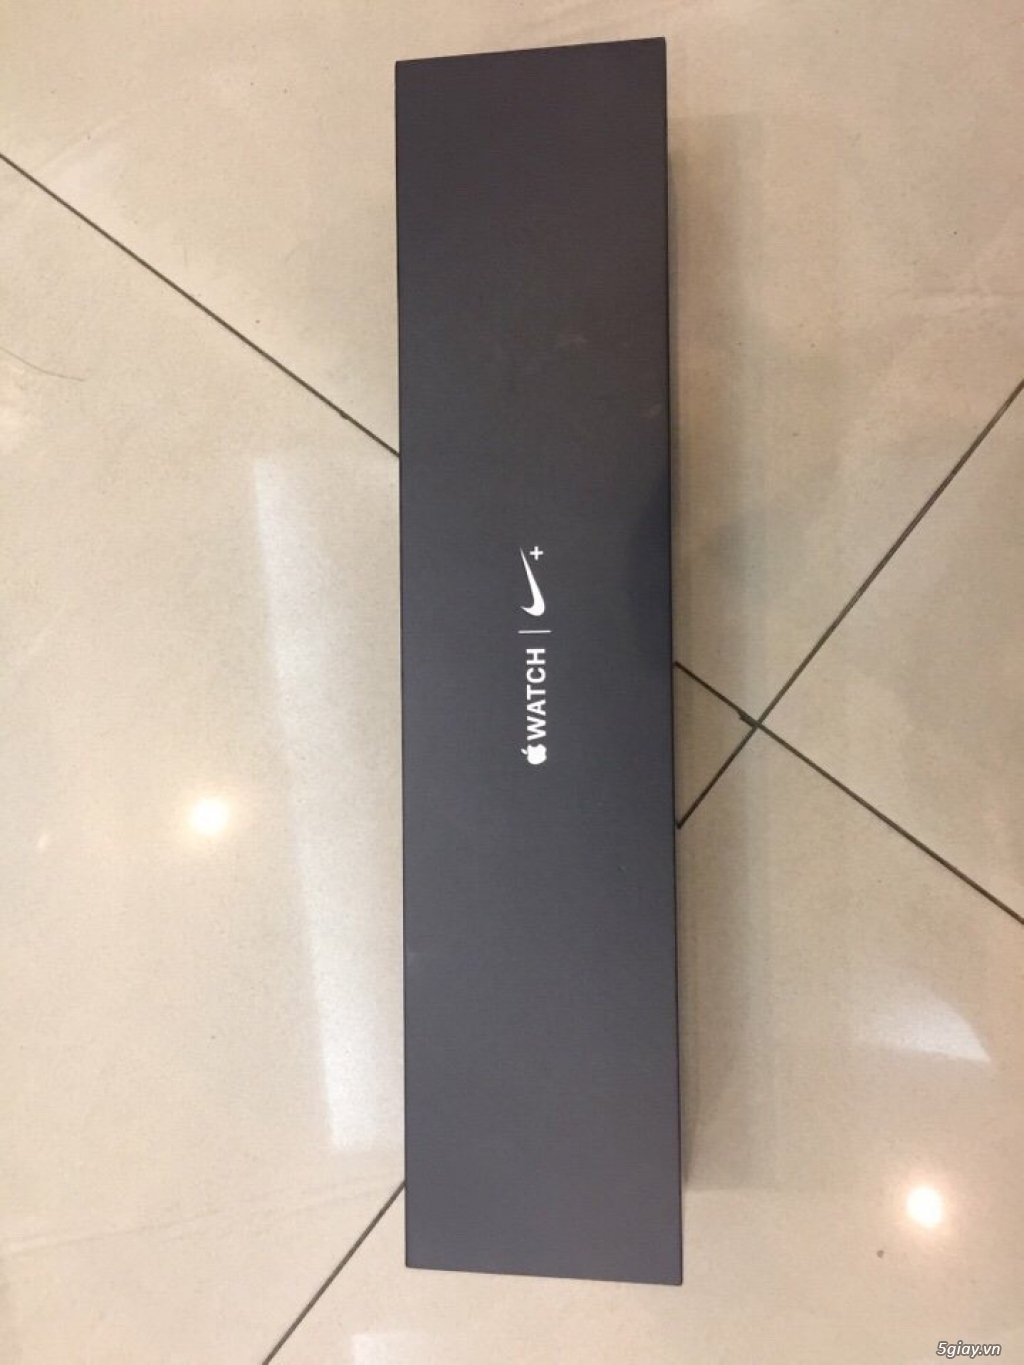 AppleWatch Series 2 42mm Space Gray Aluminum Nike Sport Band